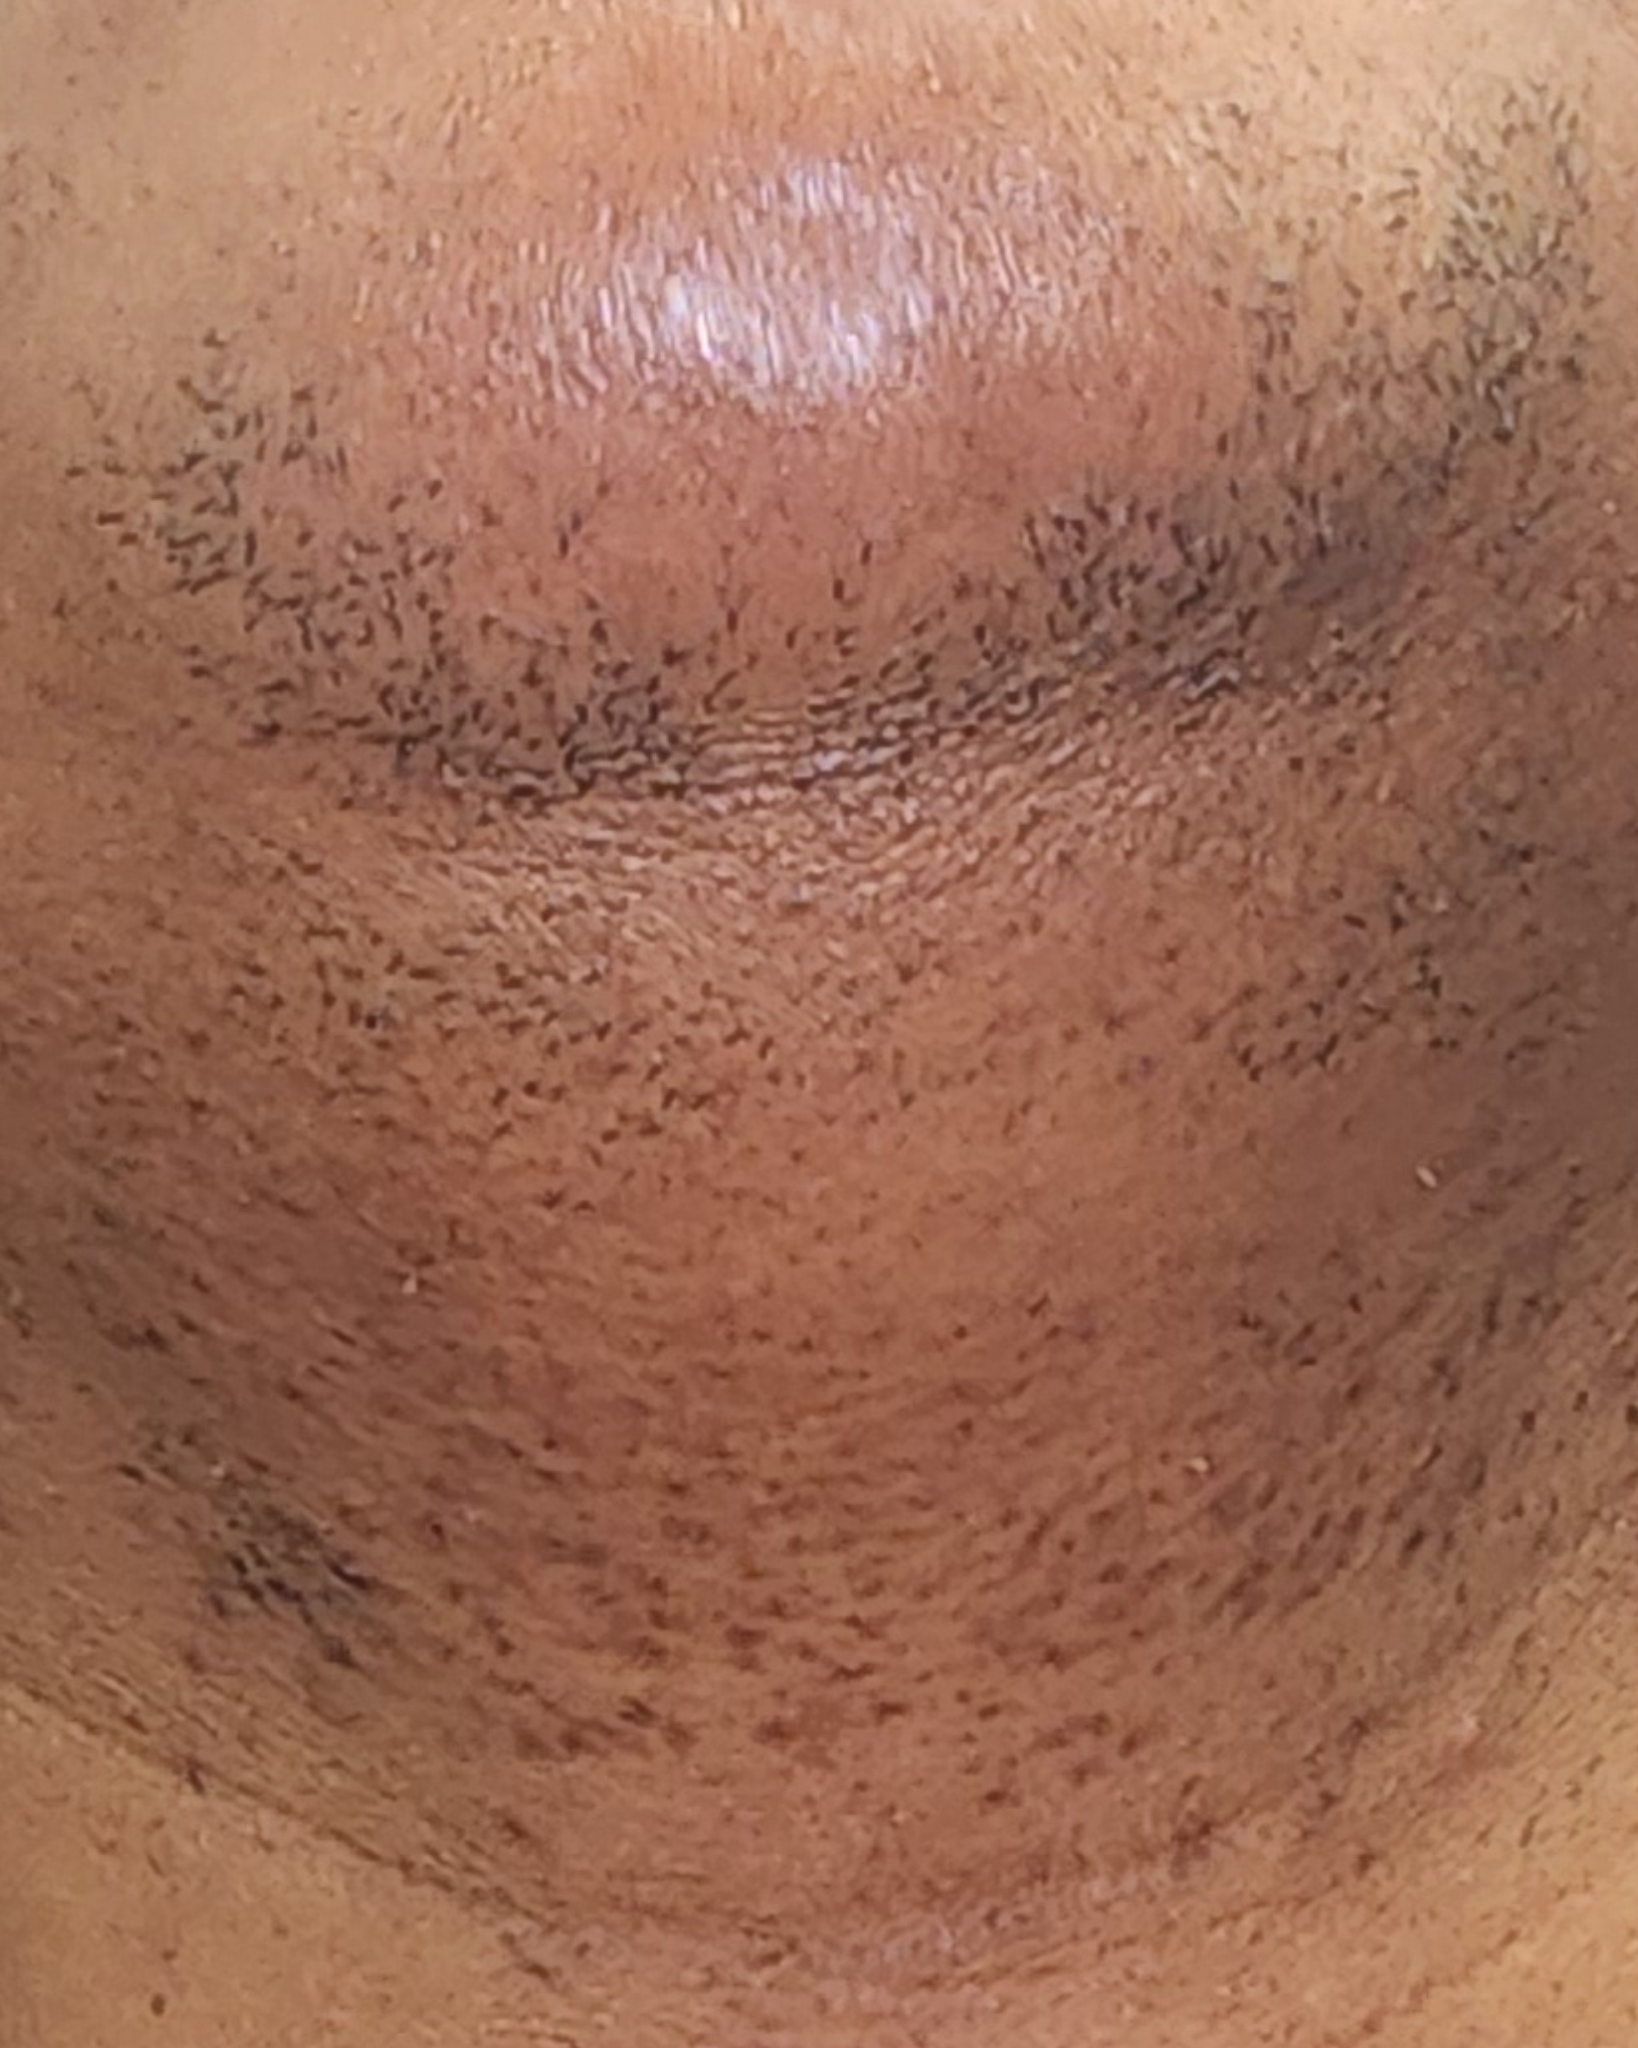 Laser Hair Removal Hair Line Clean Up (20)